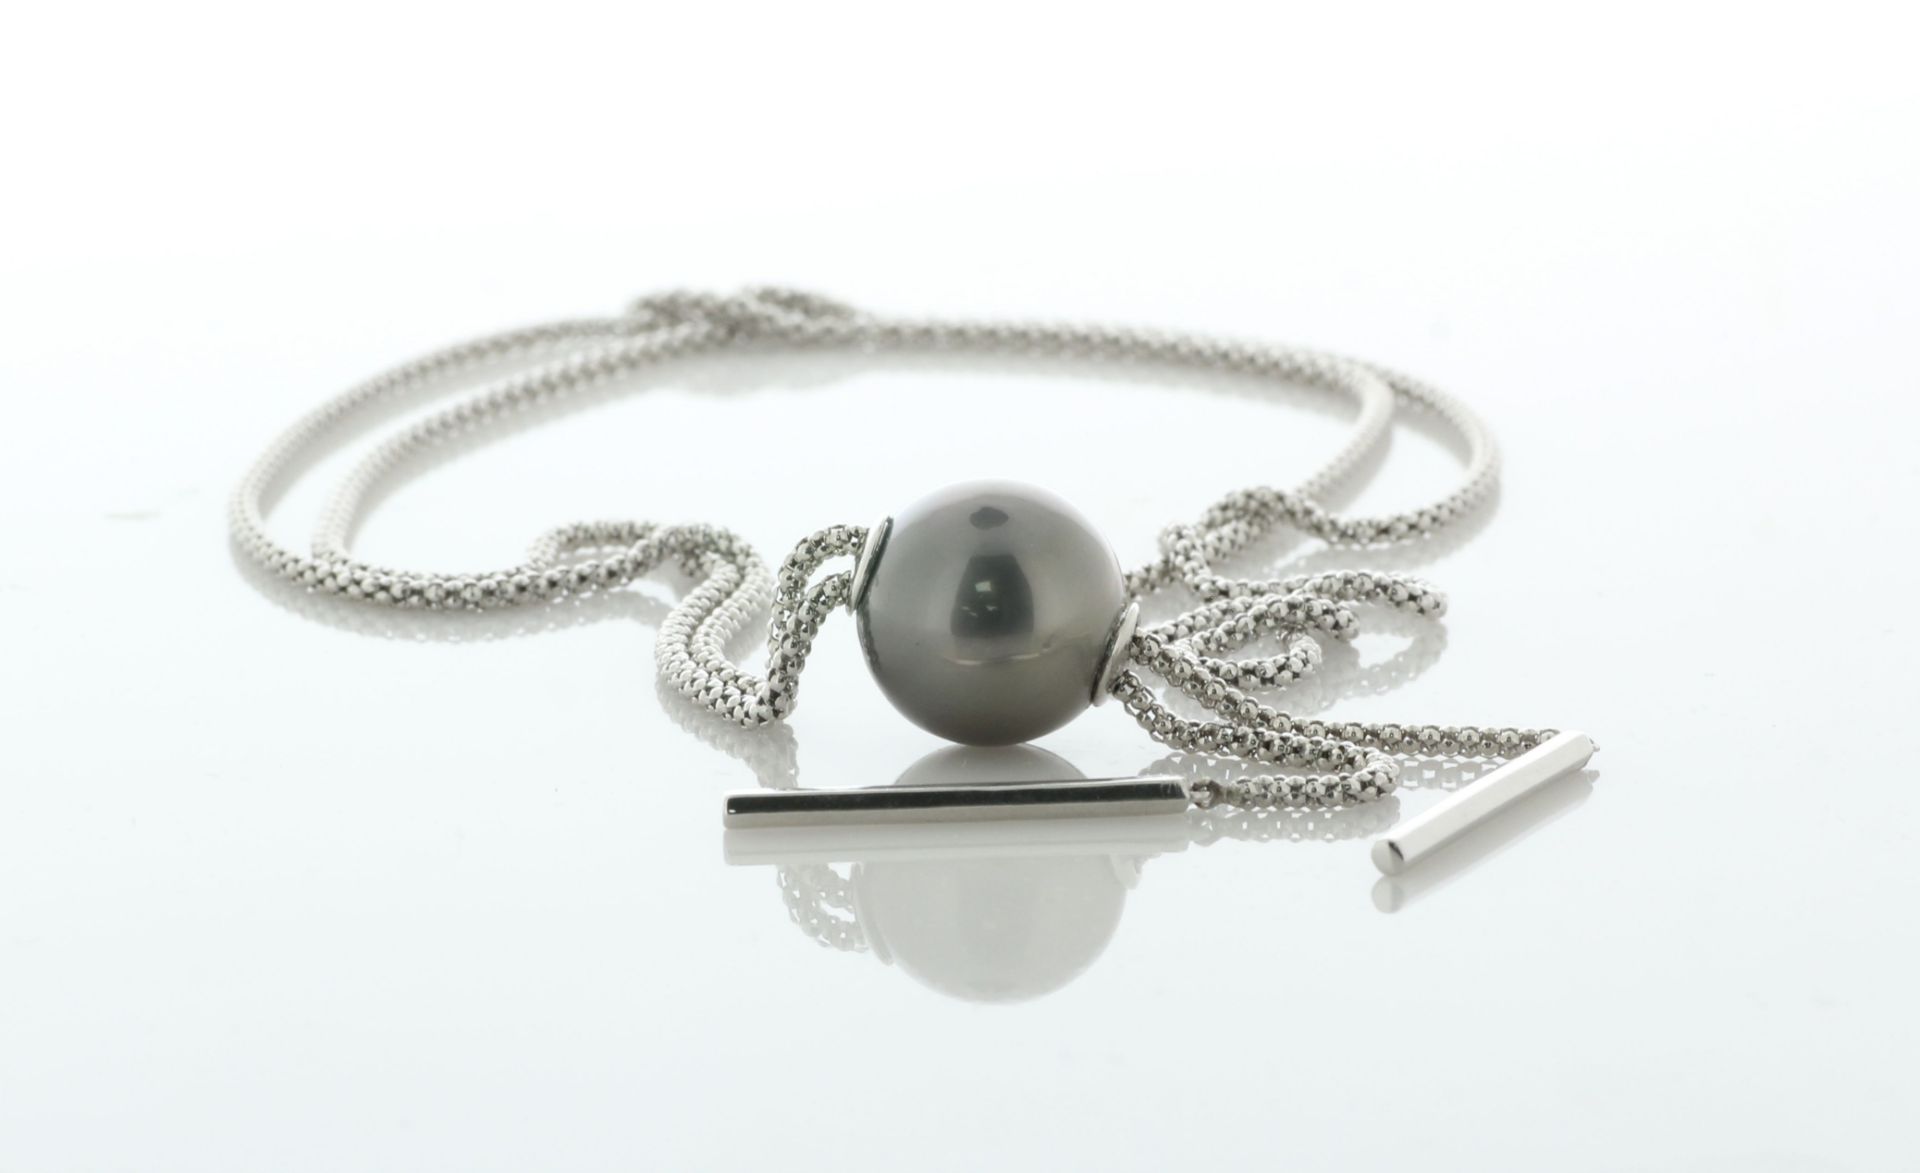 14mm Tahiti Pearl Necklace Moveable Pearl Sterling Silver Chain - Valued By AGI £690.00 - A 14mm - Image 5 of 7